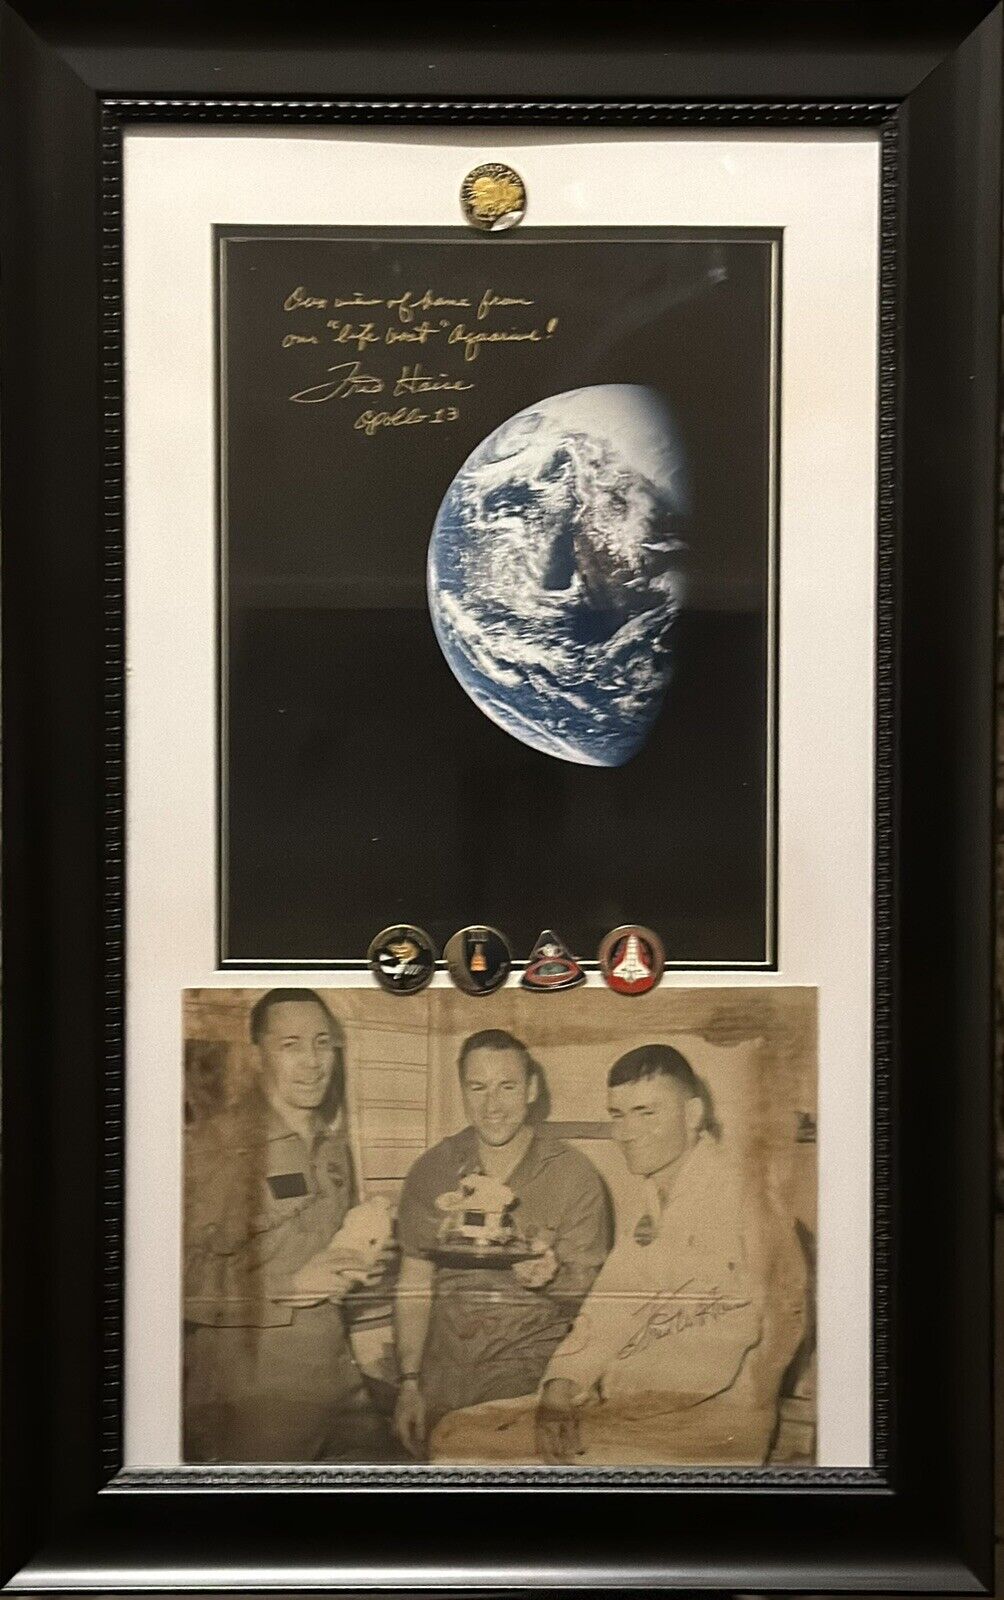 Apollo 13 Signed Fred Haise Inscribed Earth Photo & Crew Signed Newspaper Photo